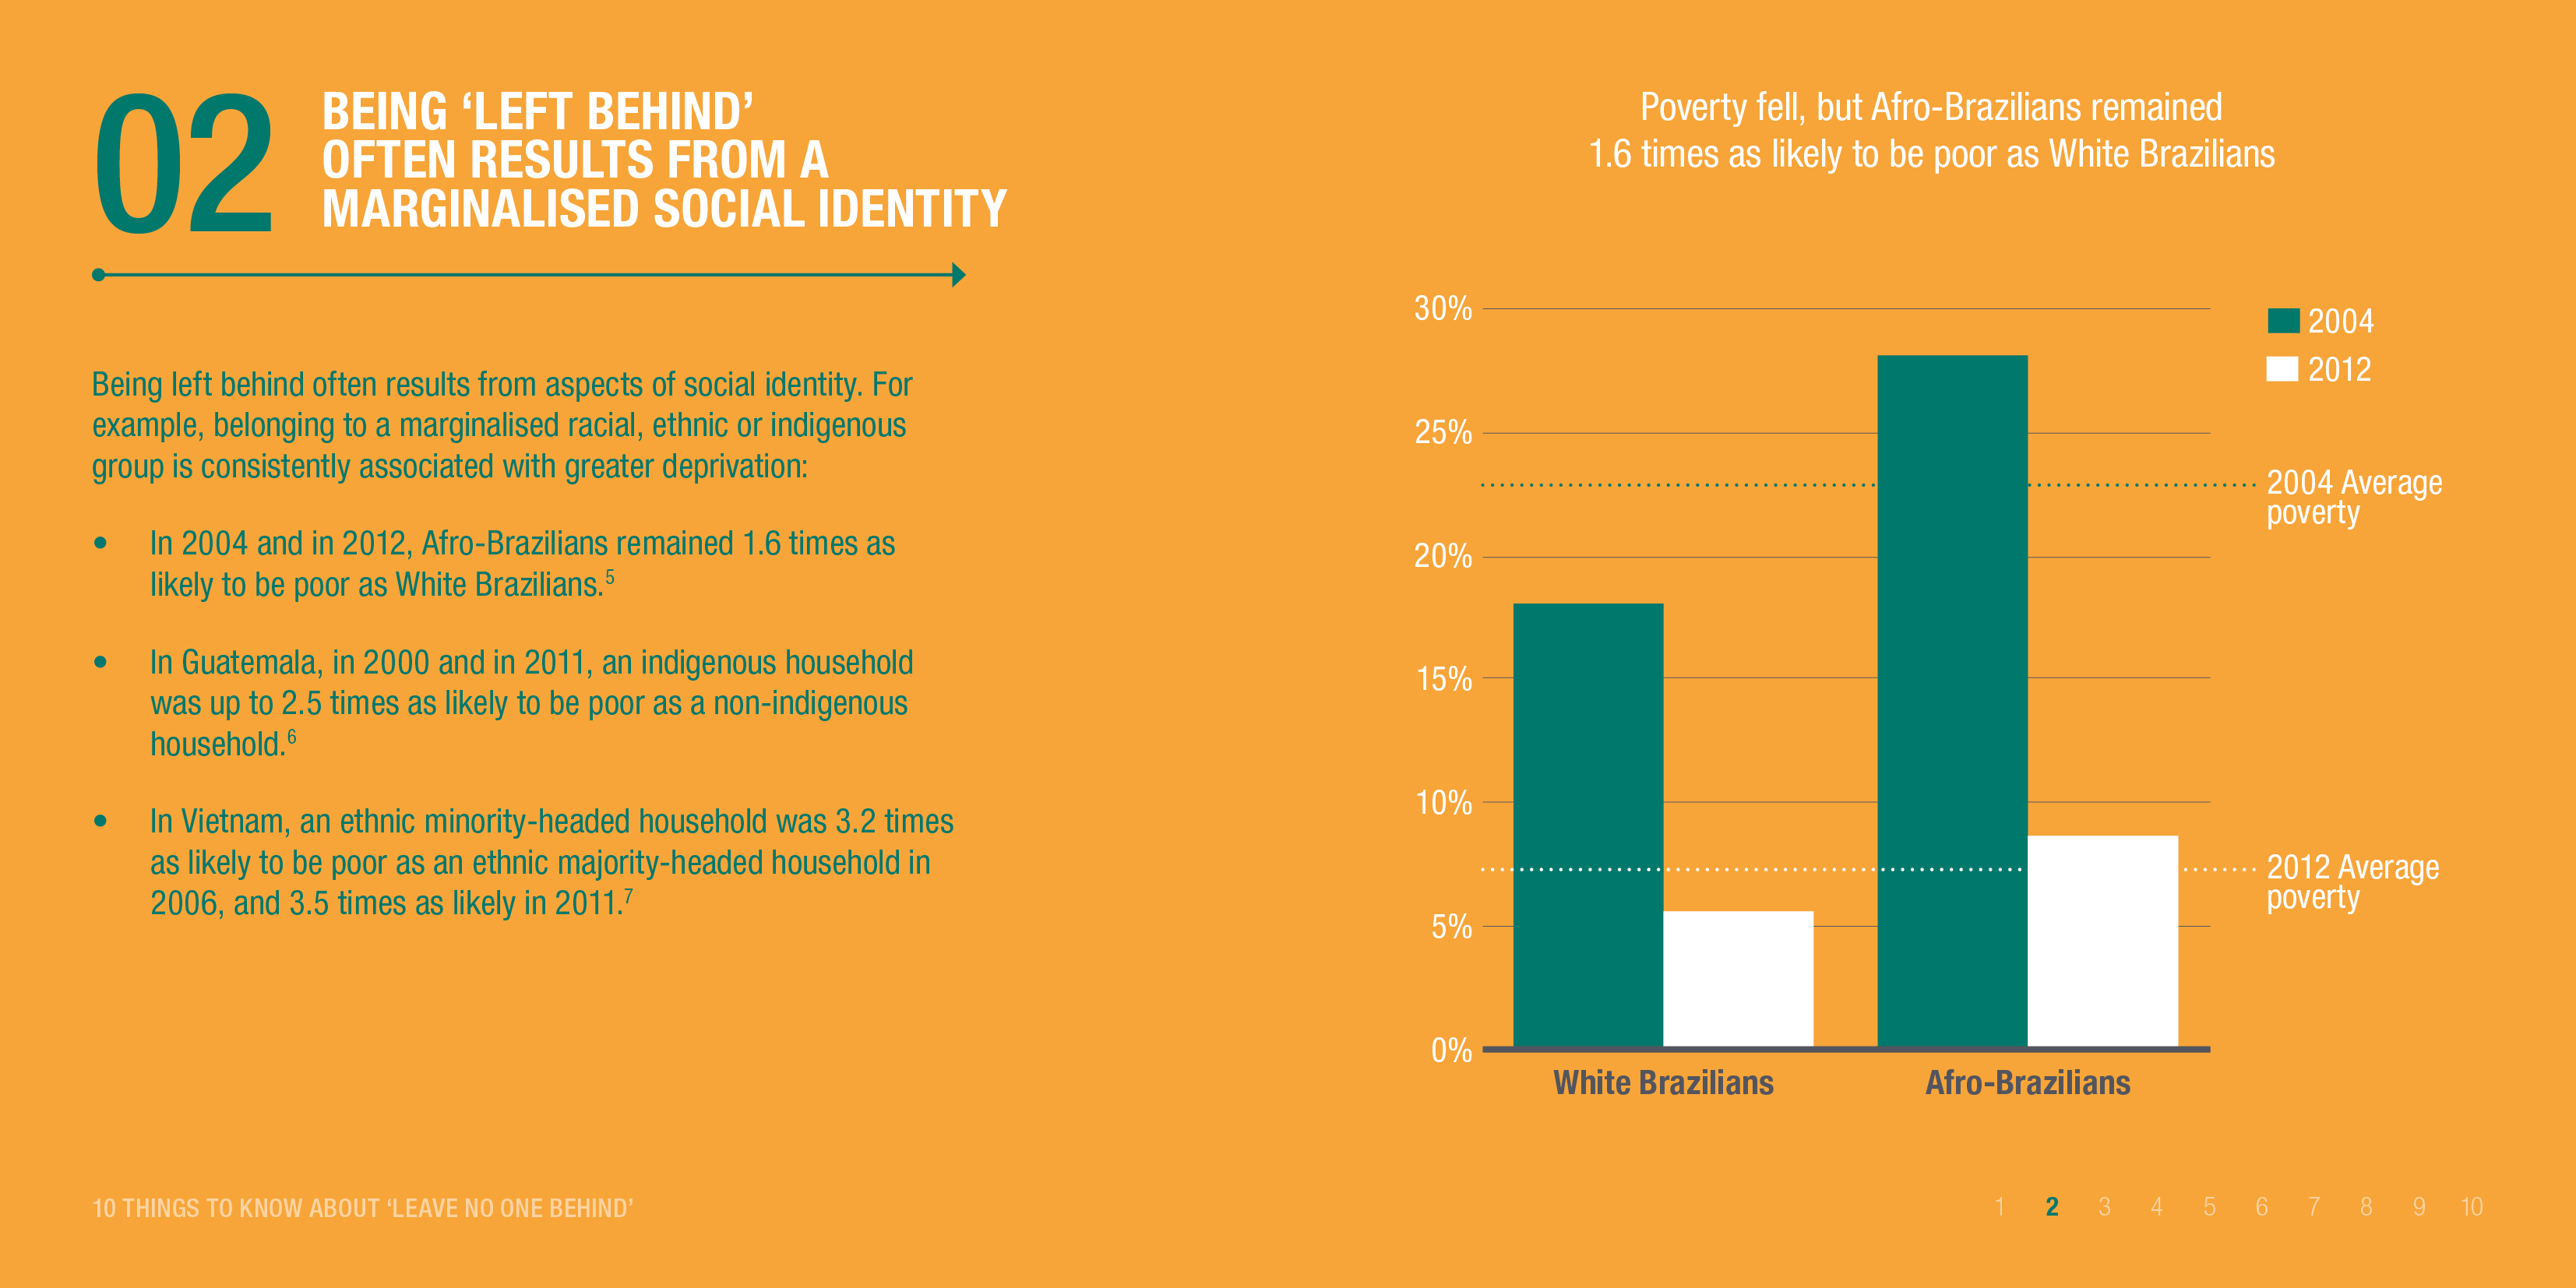 Being 'left behind' often results from a marginalised social identity